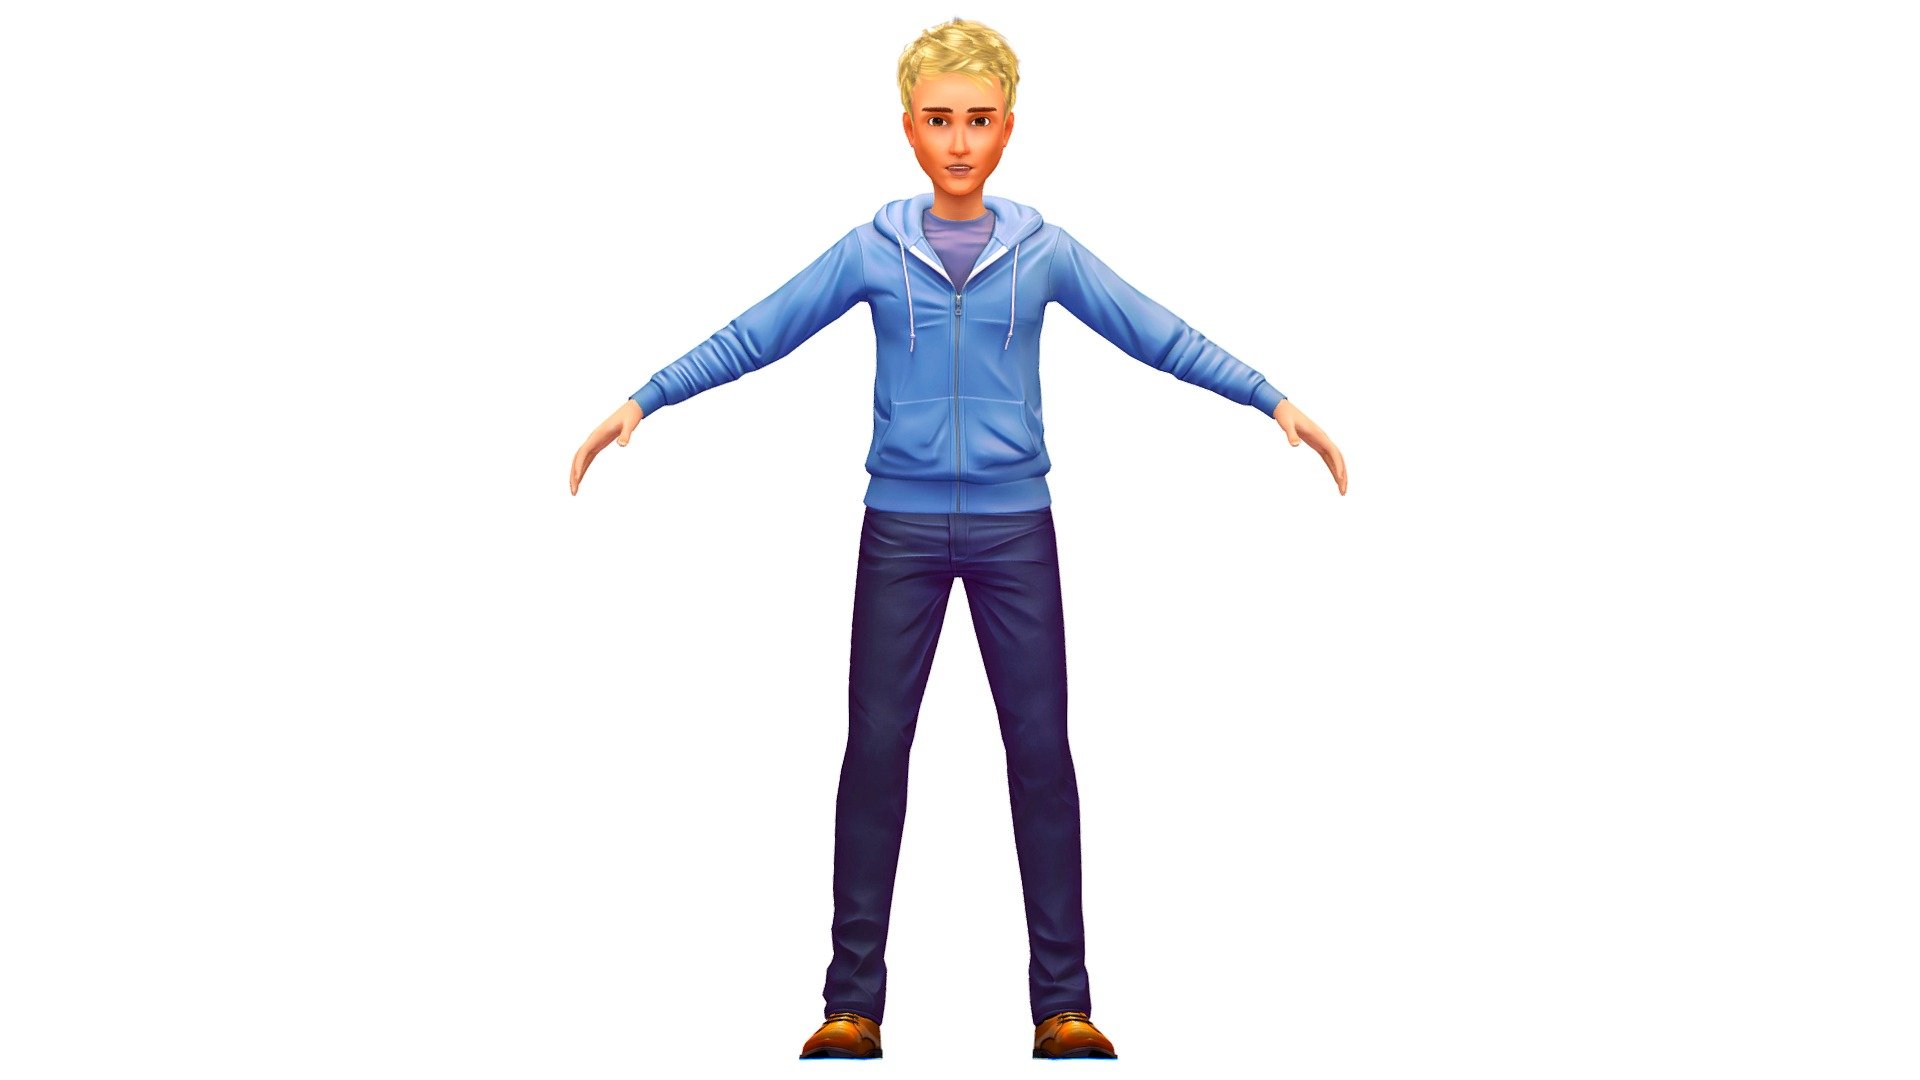 you can combine and match othercombinations using the collection:

hair collection - https://skfb.ly/ovqTn

clotch collection - https://skfb.ly/ovqT7

lowpoly avatar collection - https://skfb.ly/ovqTu - Cartoon Low Poly Style Man Avatar 002 - Buy Royalty Free 3D model by Oleg Shuldiakov (@shuographics) 3d model